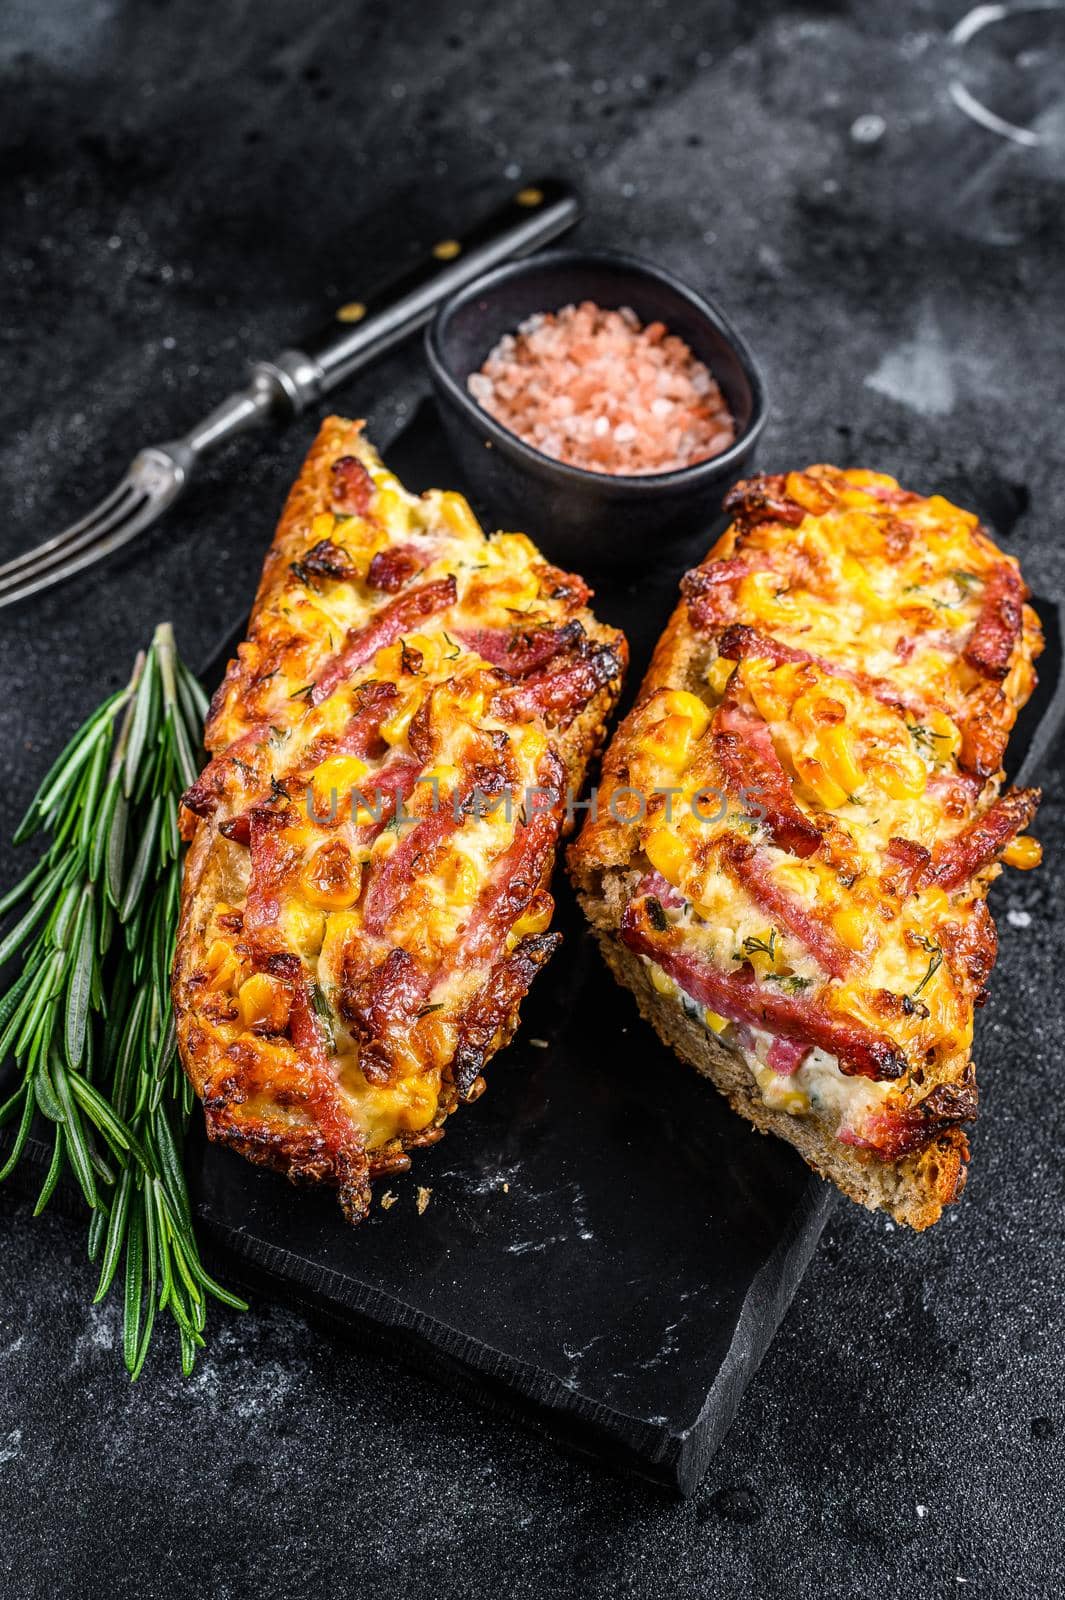 Hot baked open Baguette sandwich with ham, bacon, vegetables and cheese. Black background. Top view.